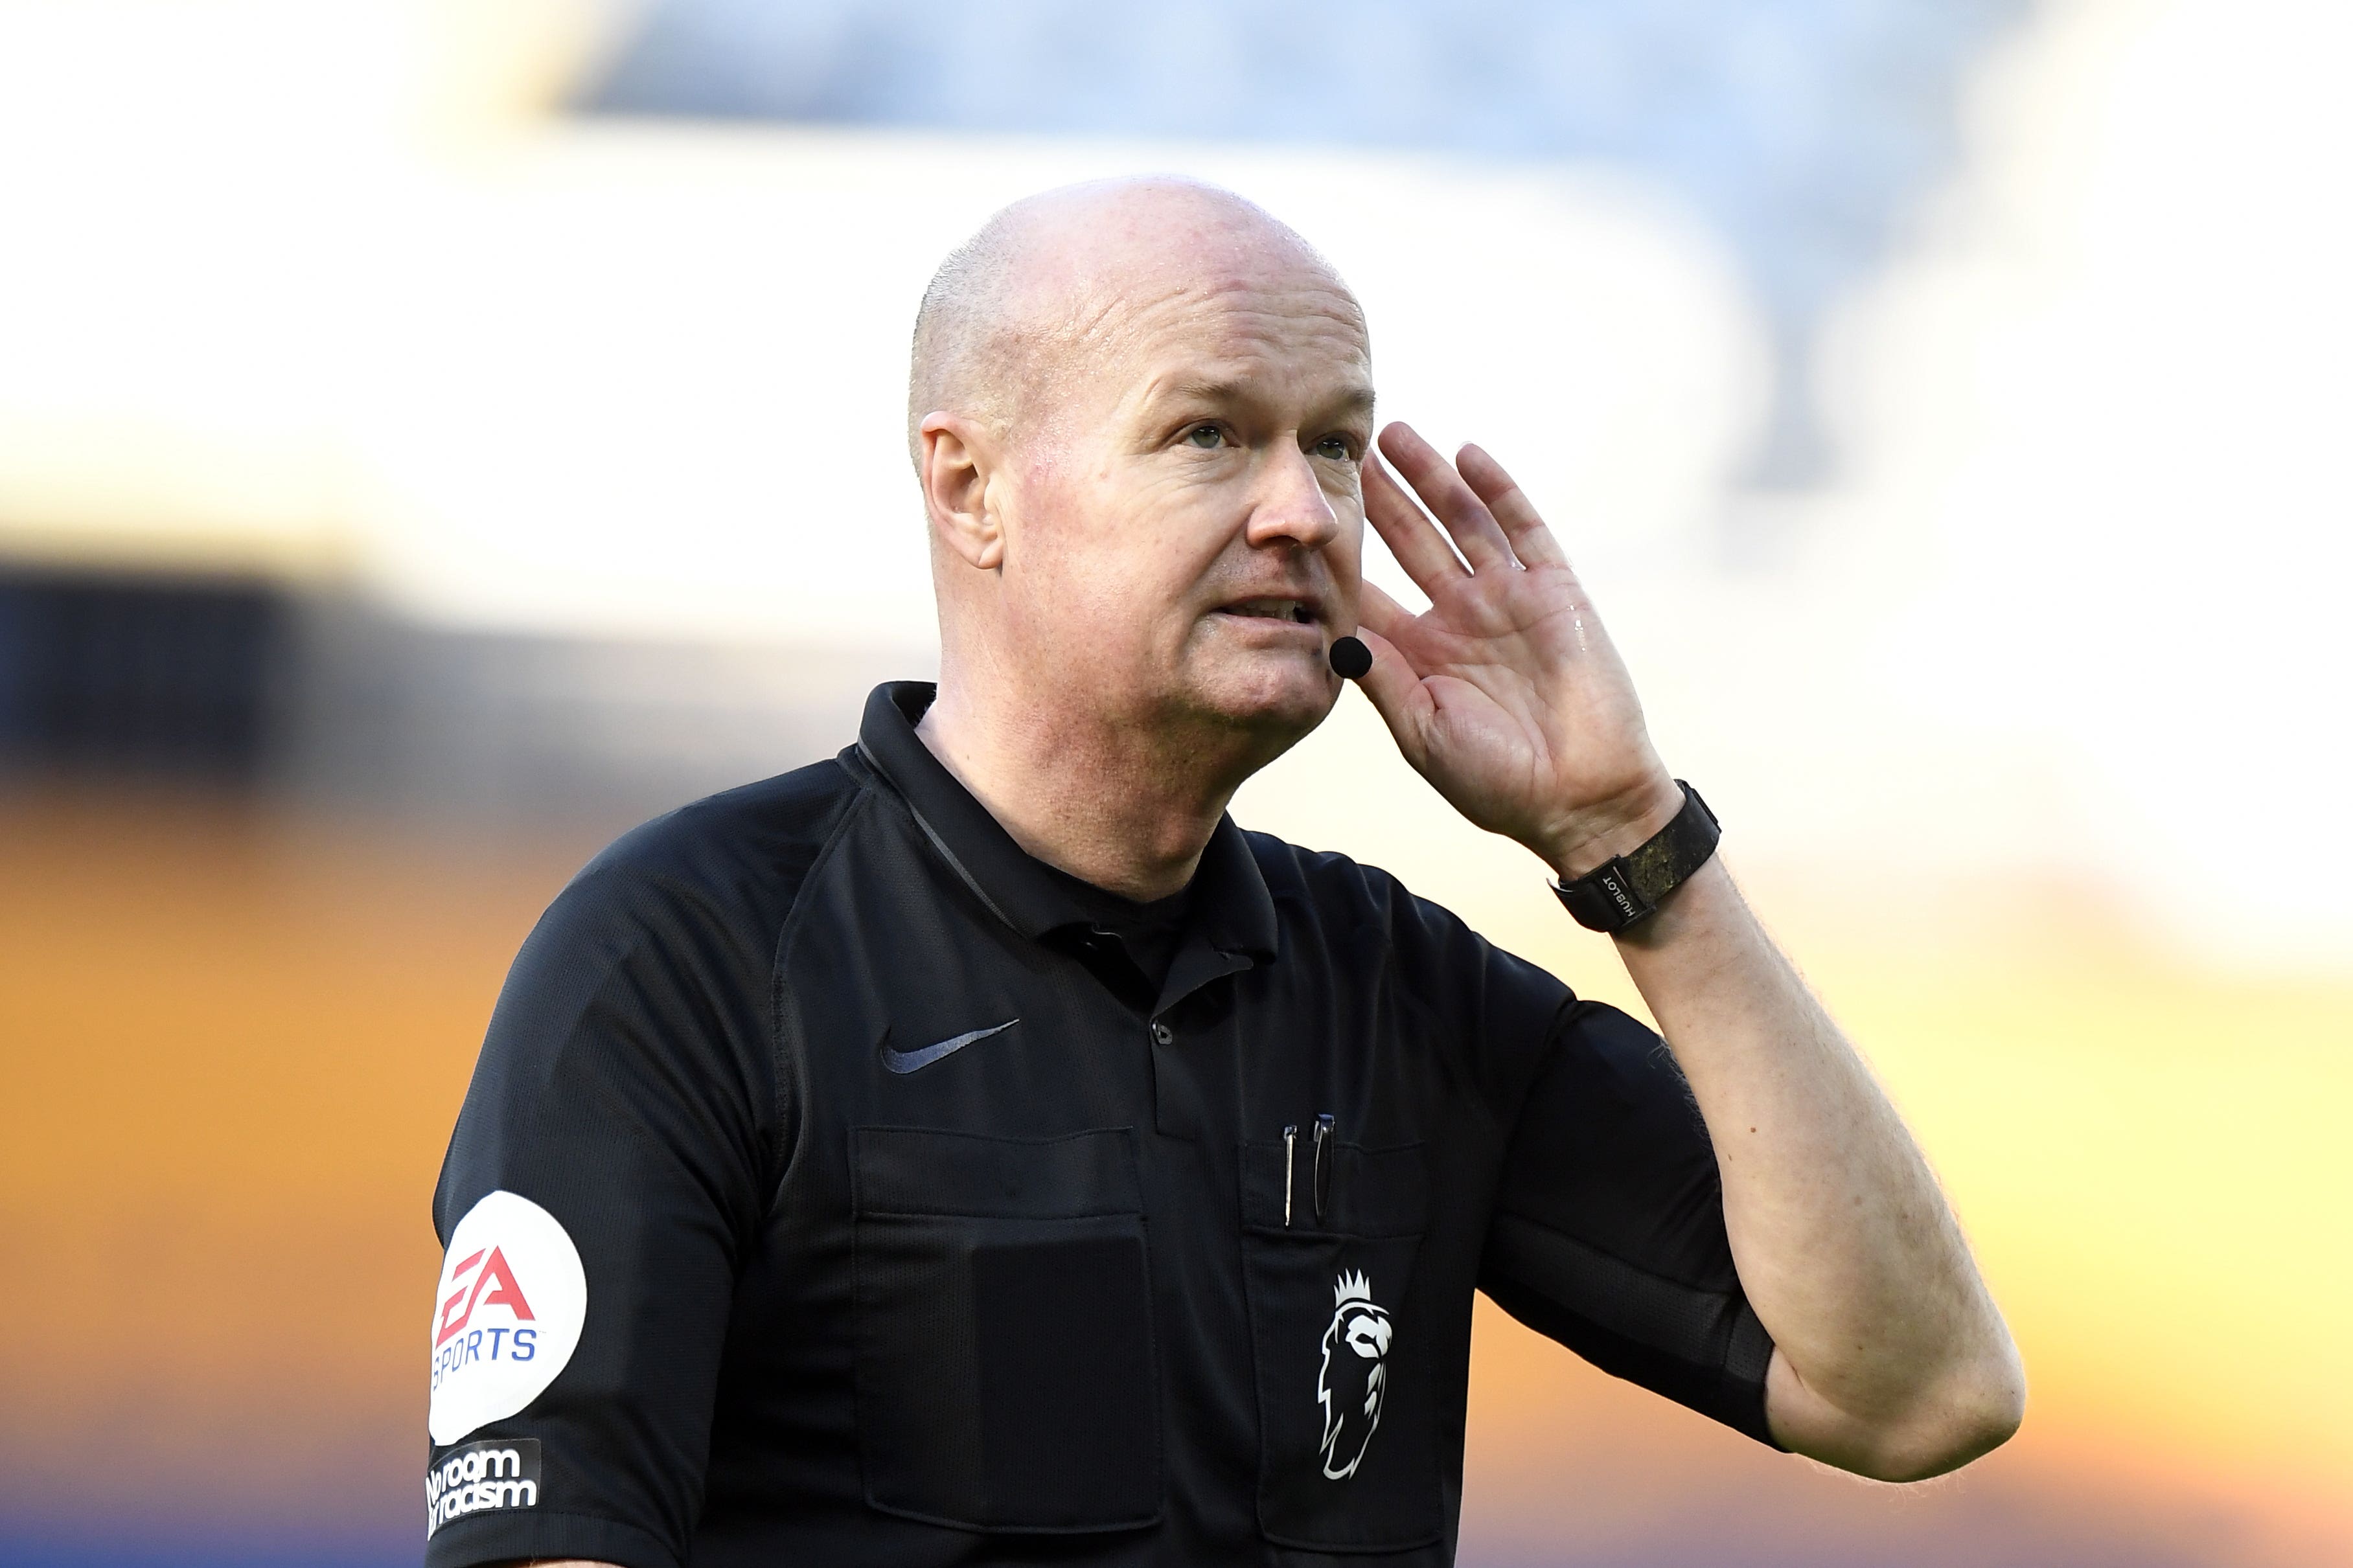 Referee Lee Mason axed after Arsenal VAR error | The Independent